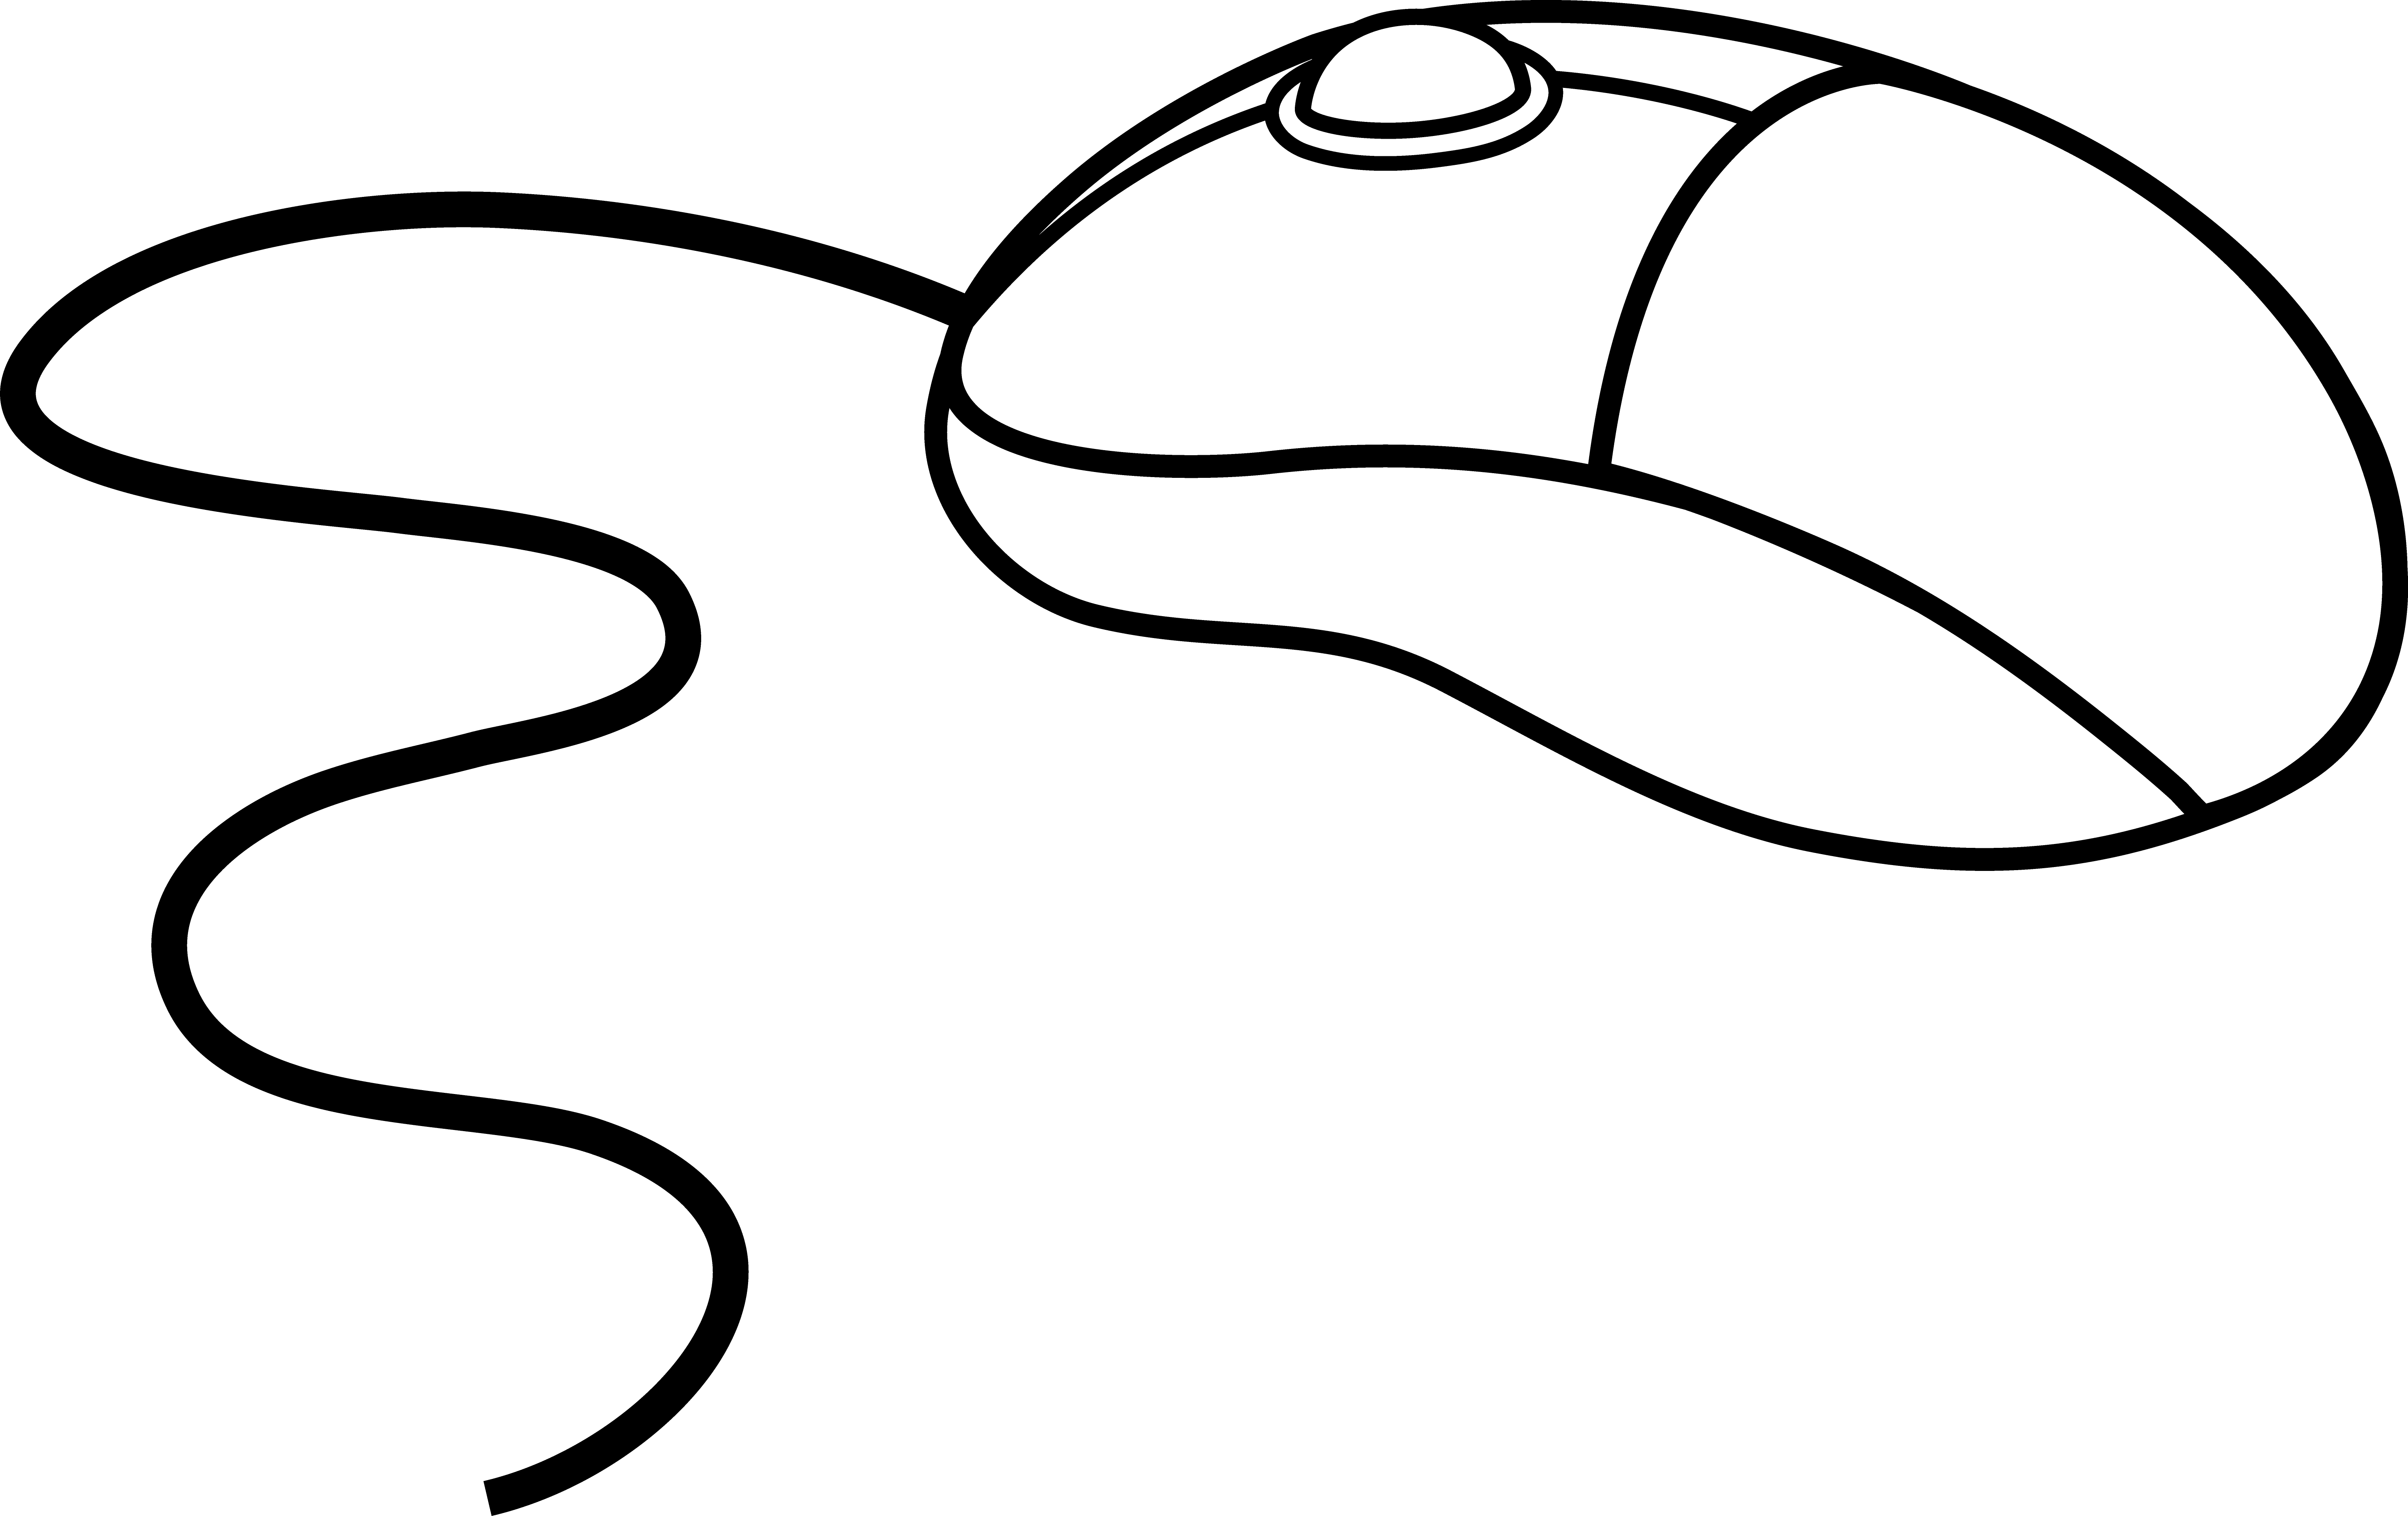 Computer Mouse Clipart Black And White | Clipart Panda - Free ...